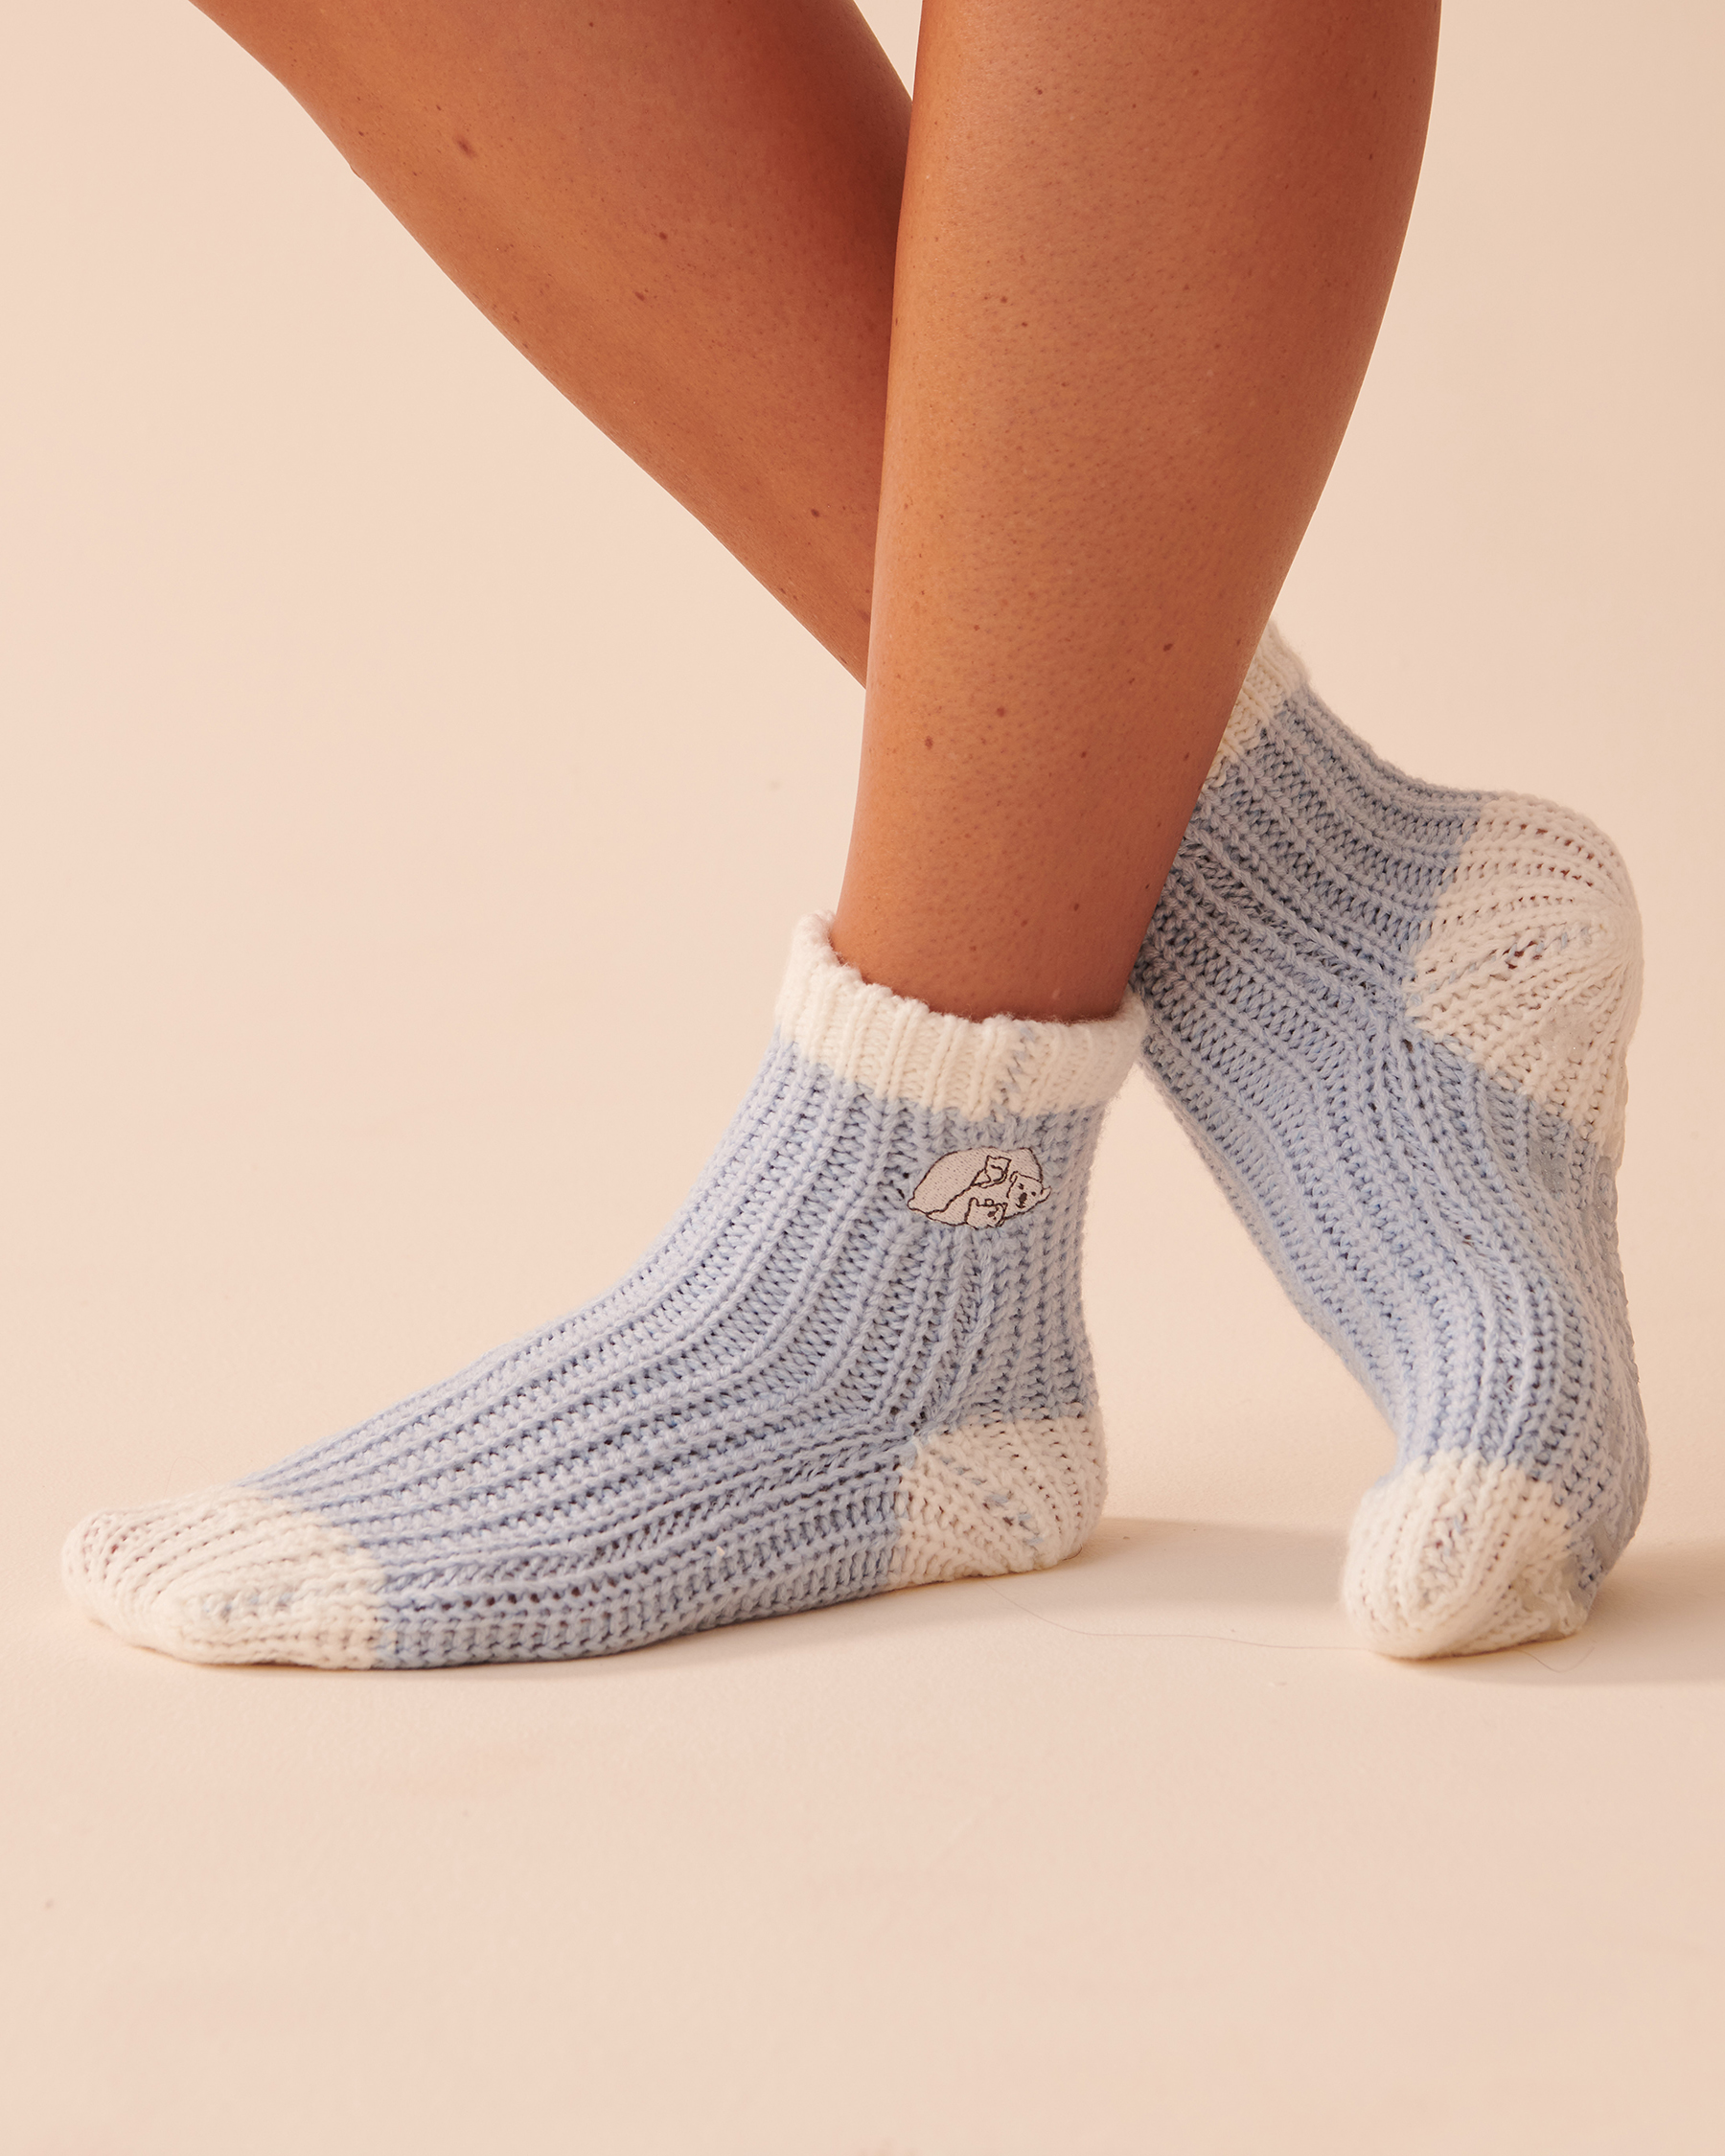 LA VIE EN ROSE Knitted Socks with Winter Embroidery Icy Blue 40700295 - View2